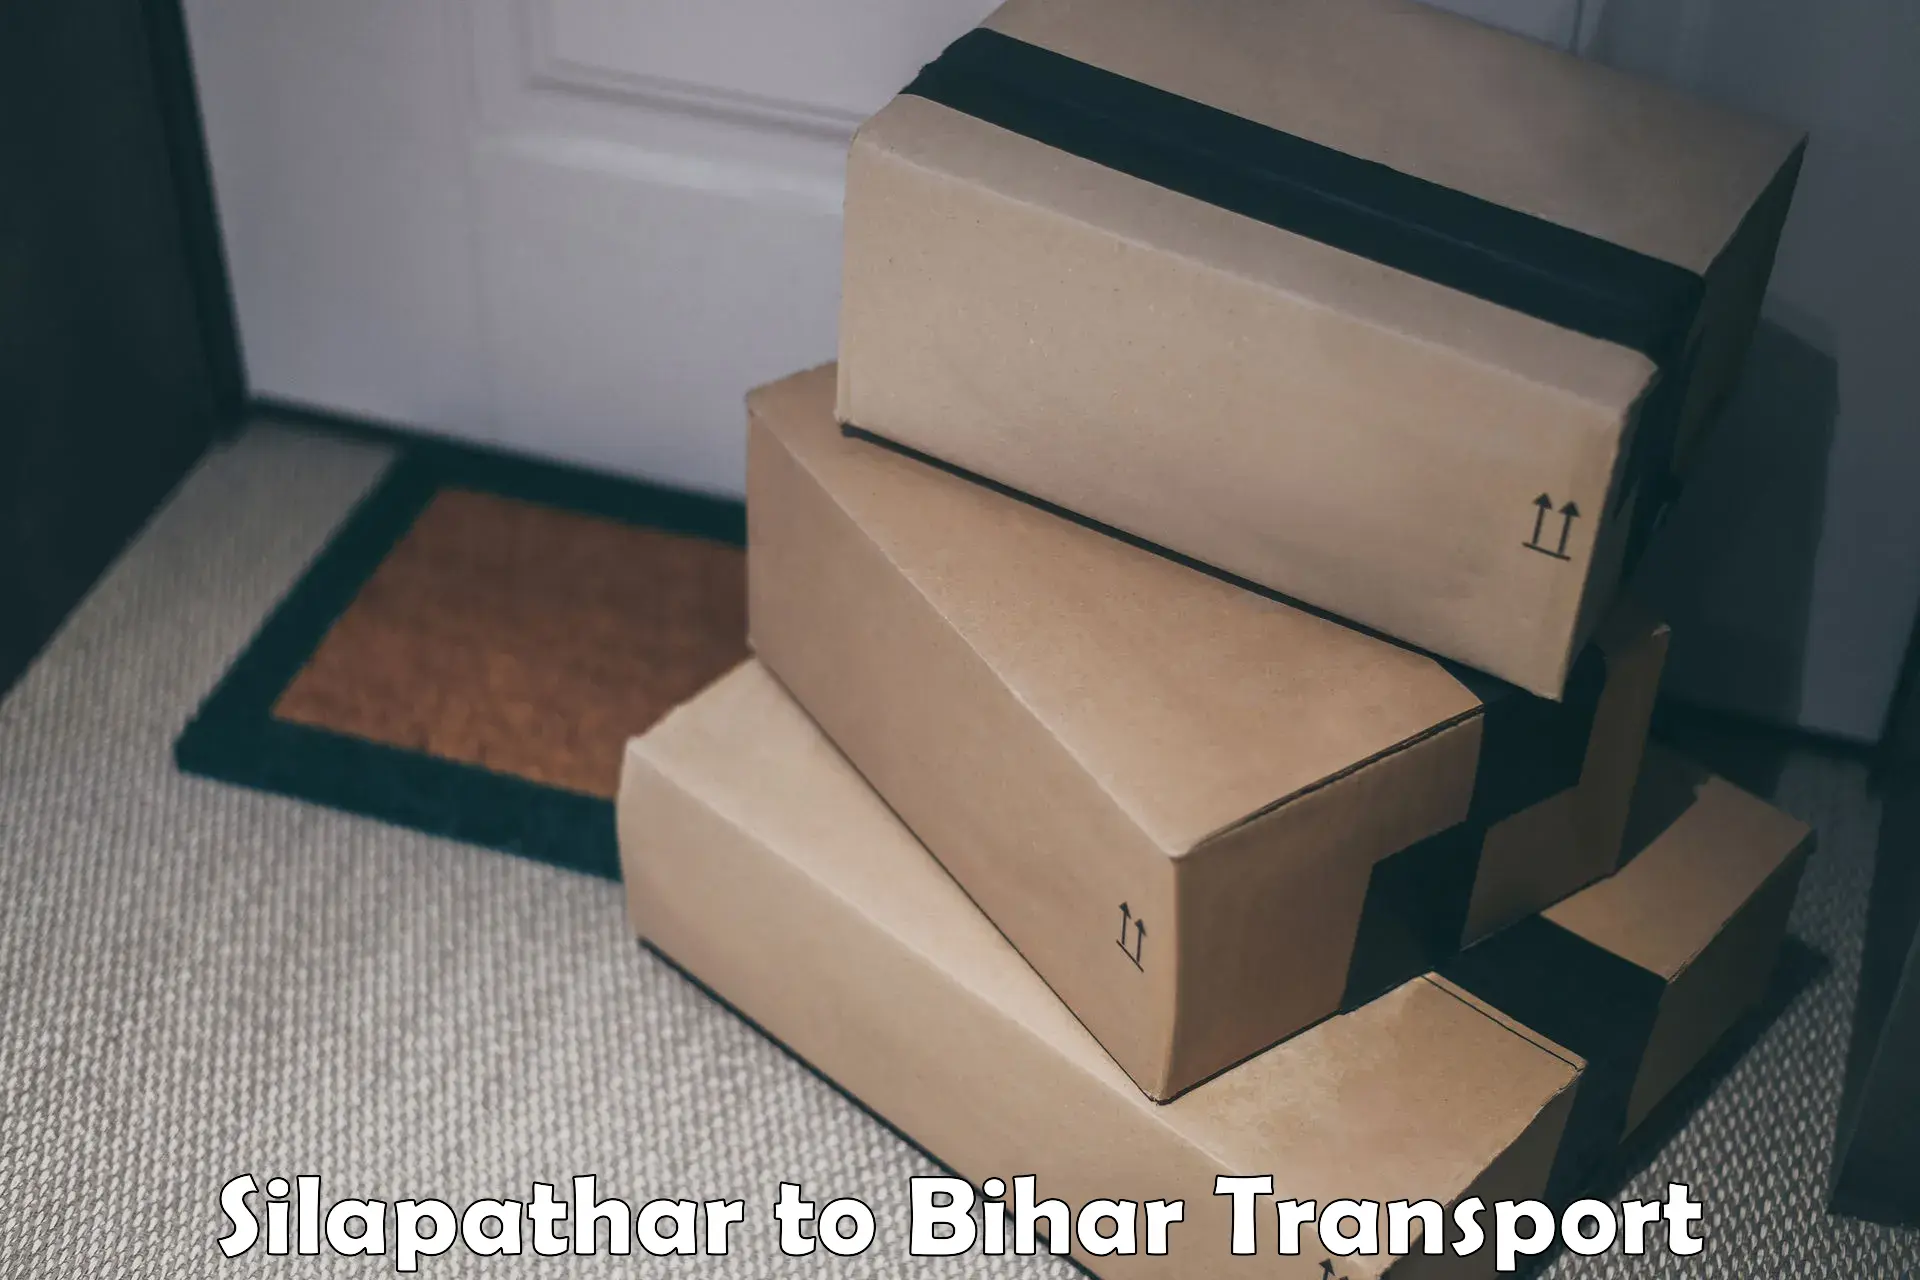 Domestic goods transportation services Silapathar to Banmankhi Bazar